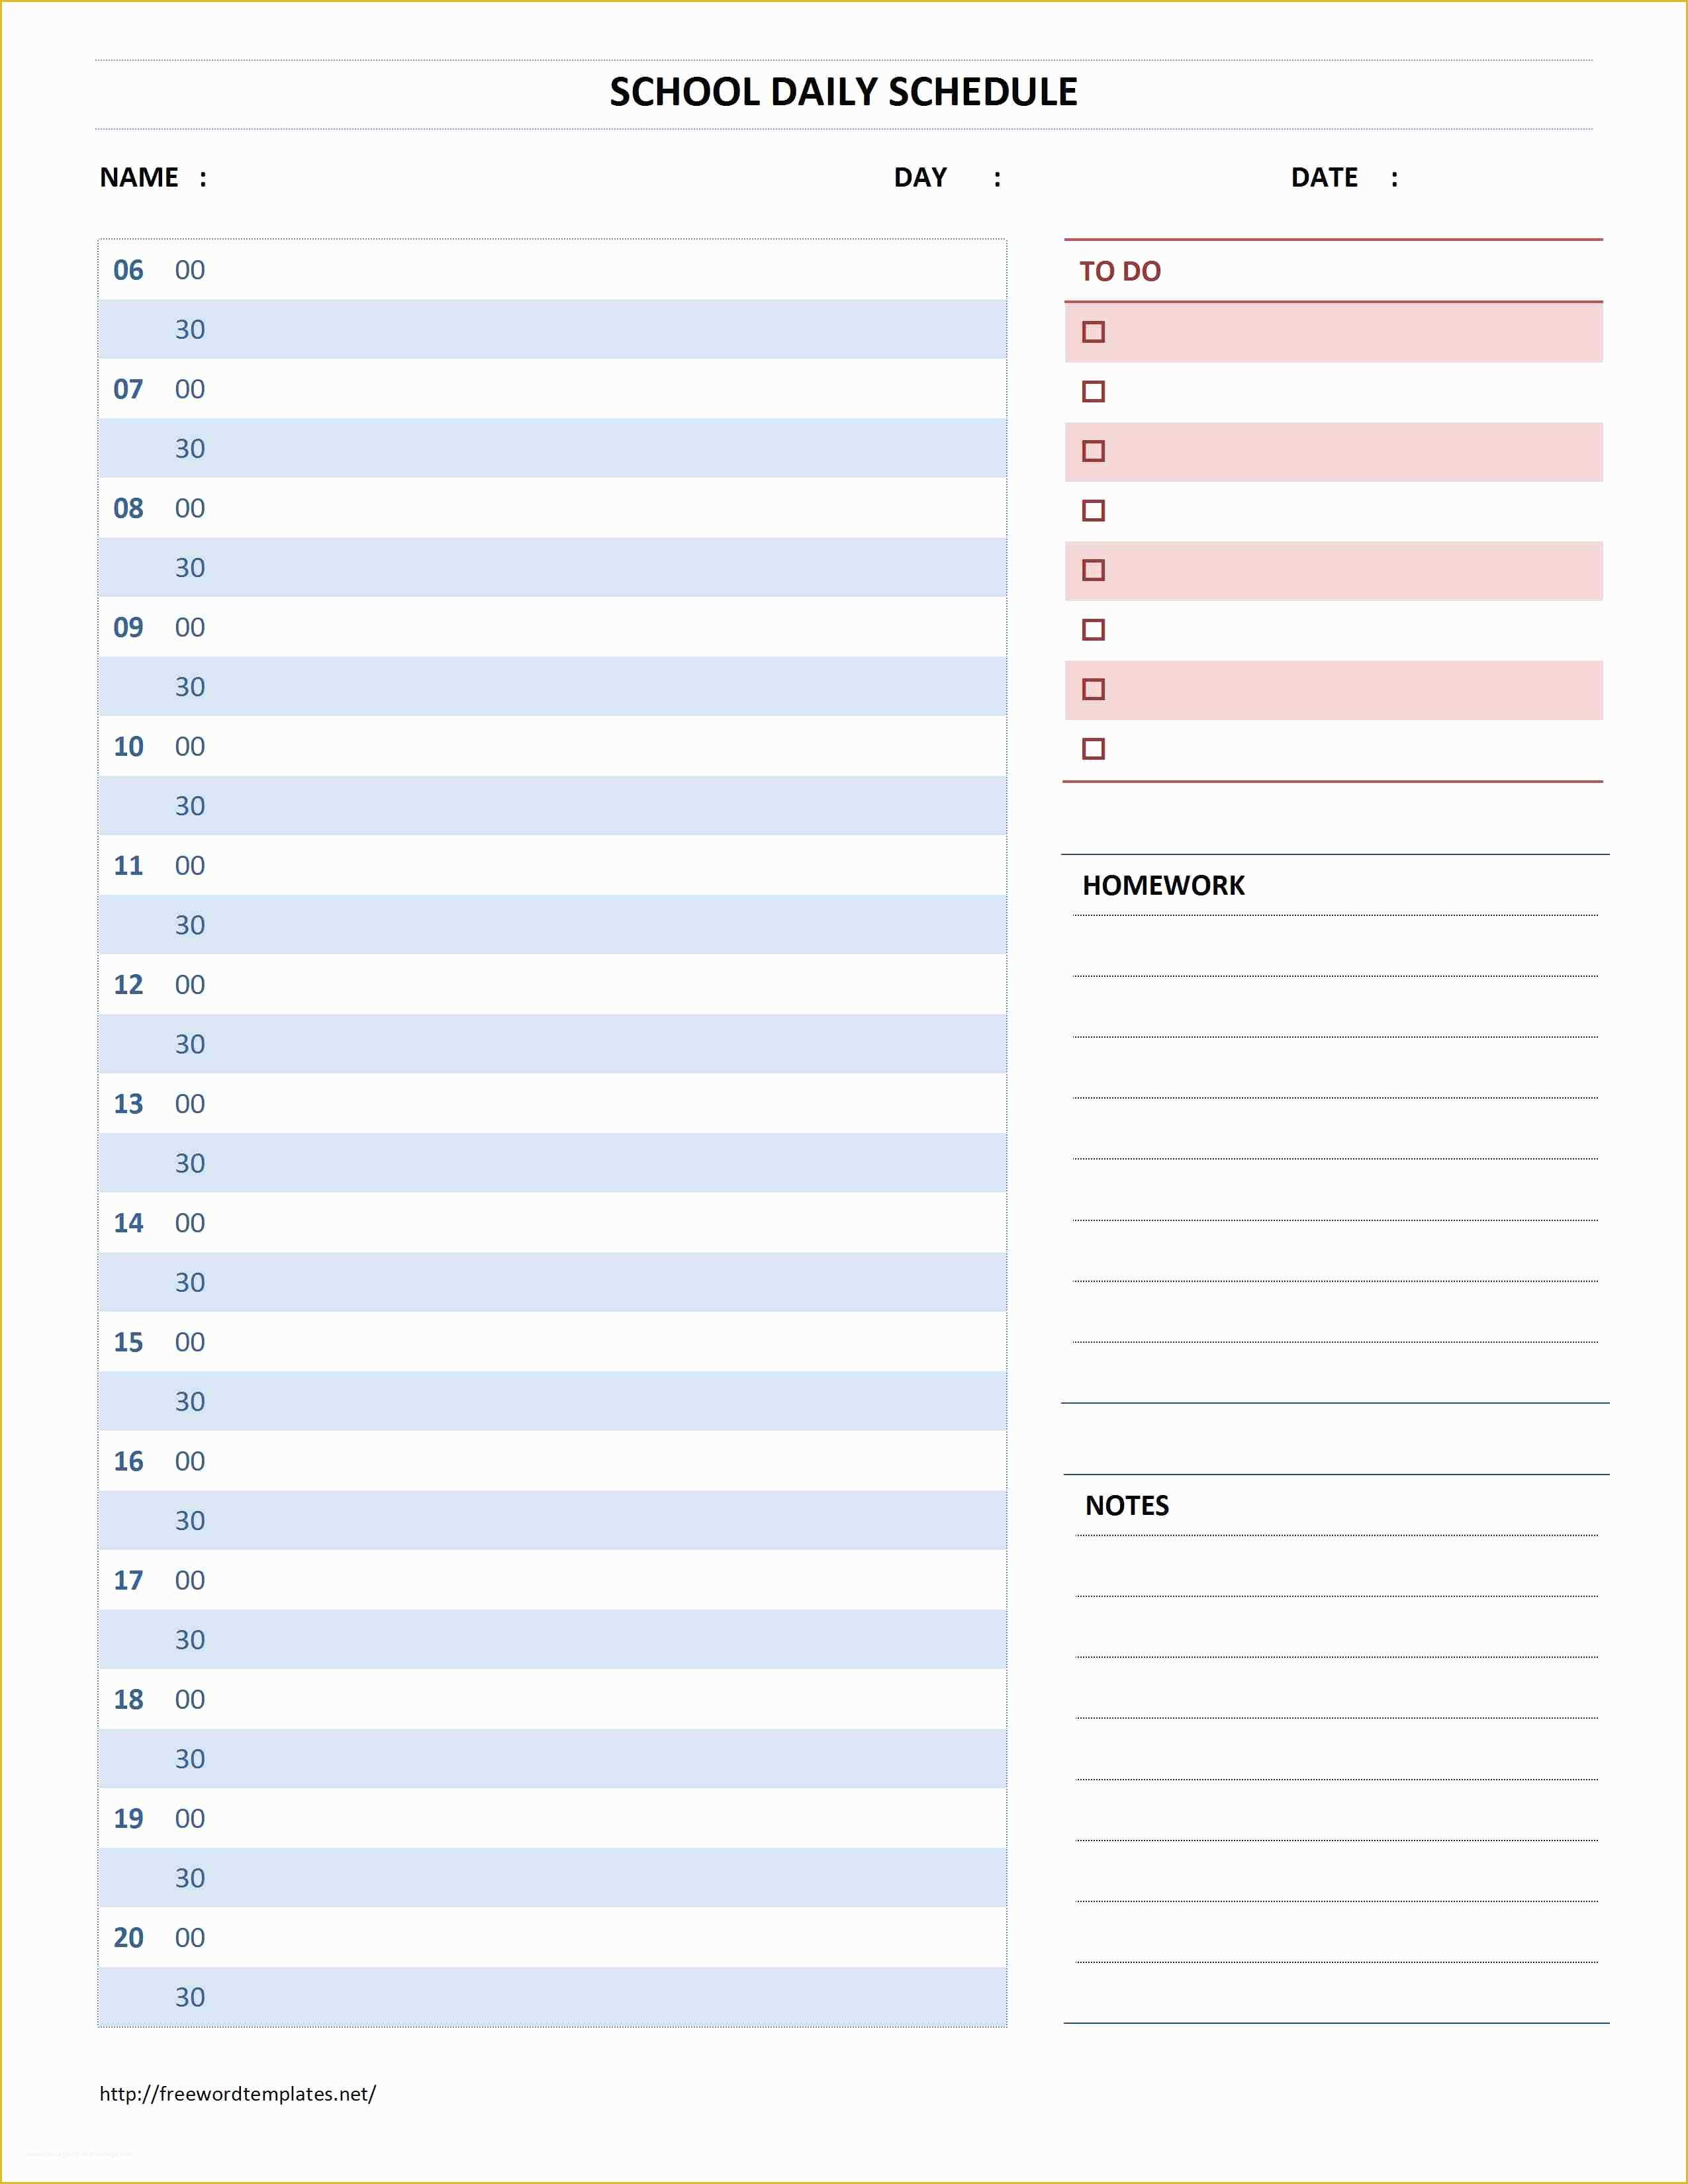 Free Daily Schedule Template Of School Daily Schedule